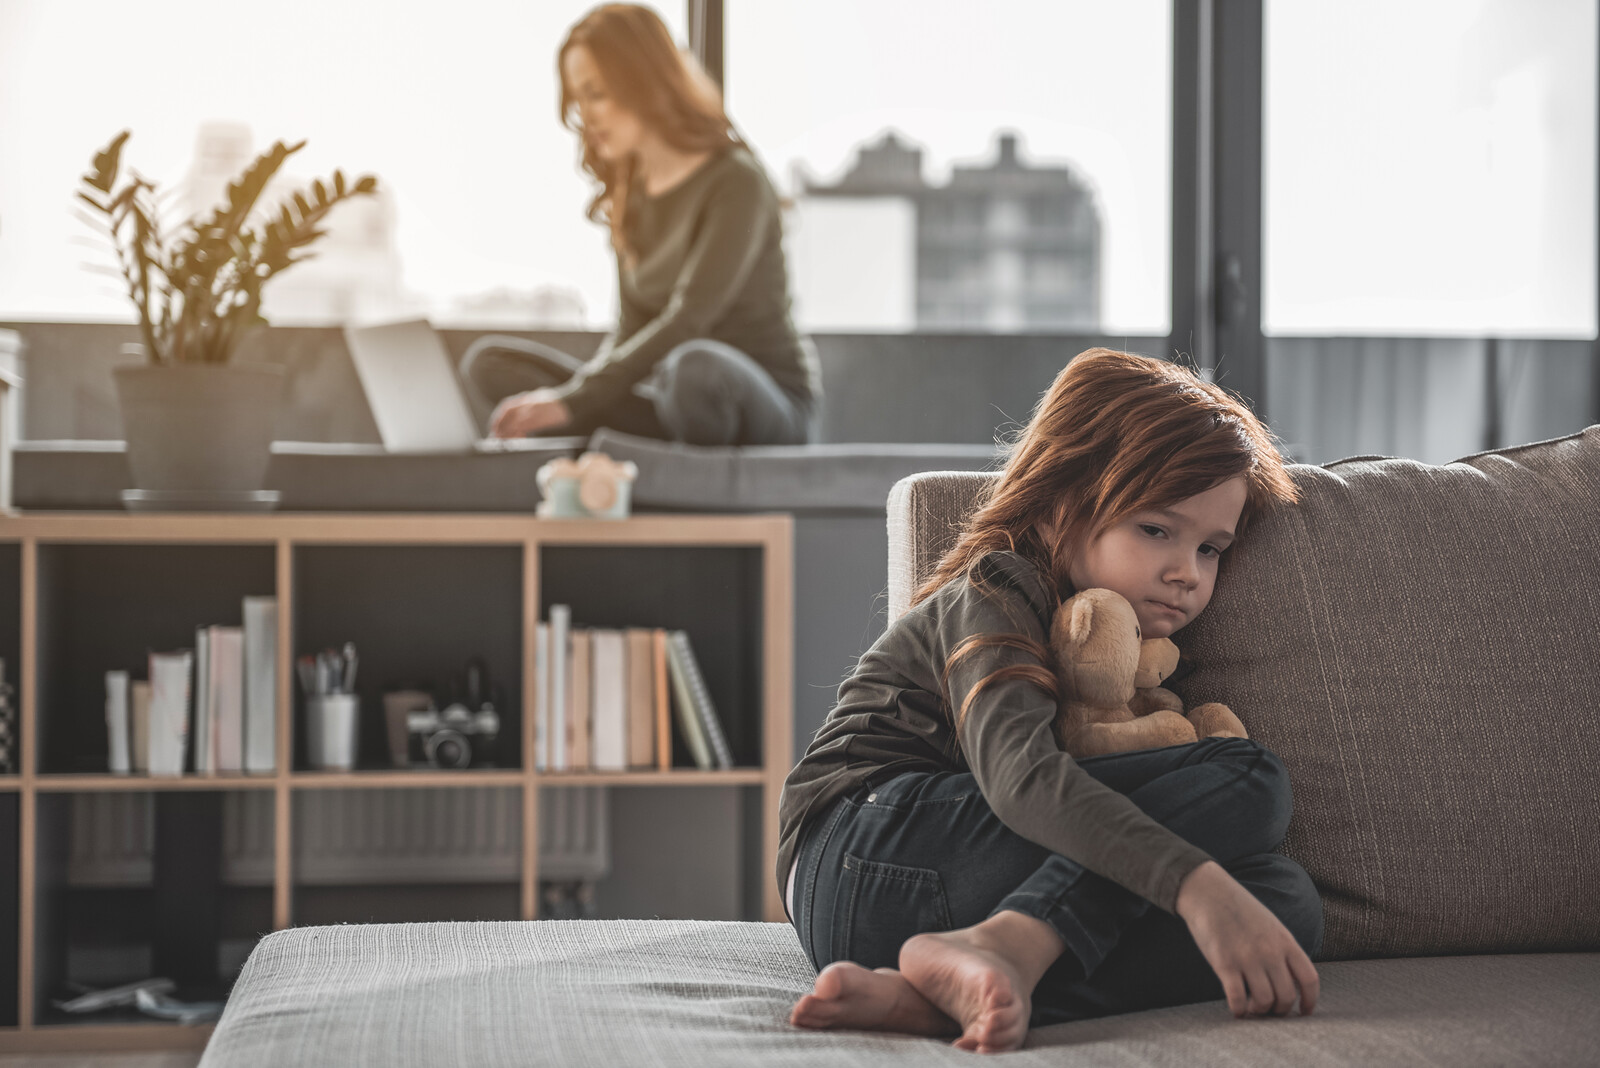 Little girl sitting on a couch looking down and sad in an article about helping parents minimize stress.